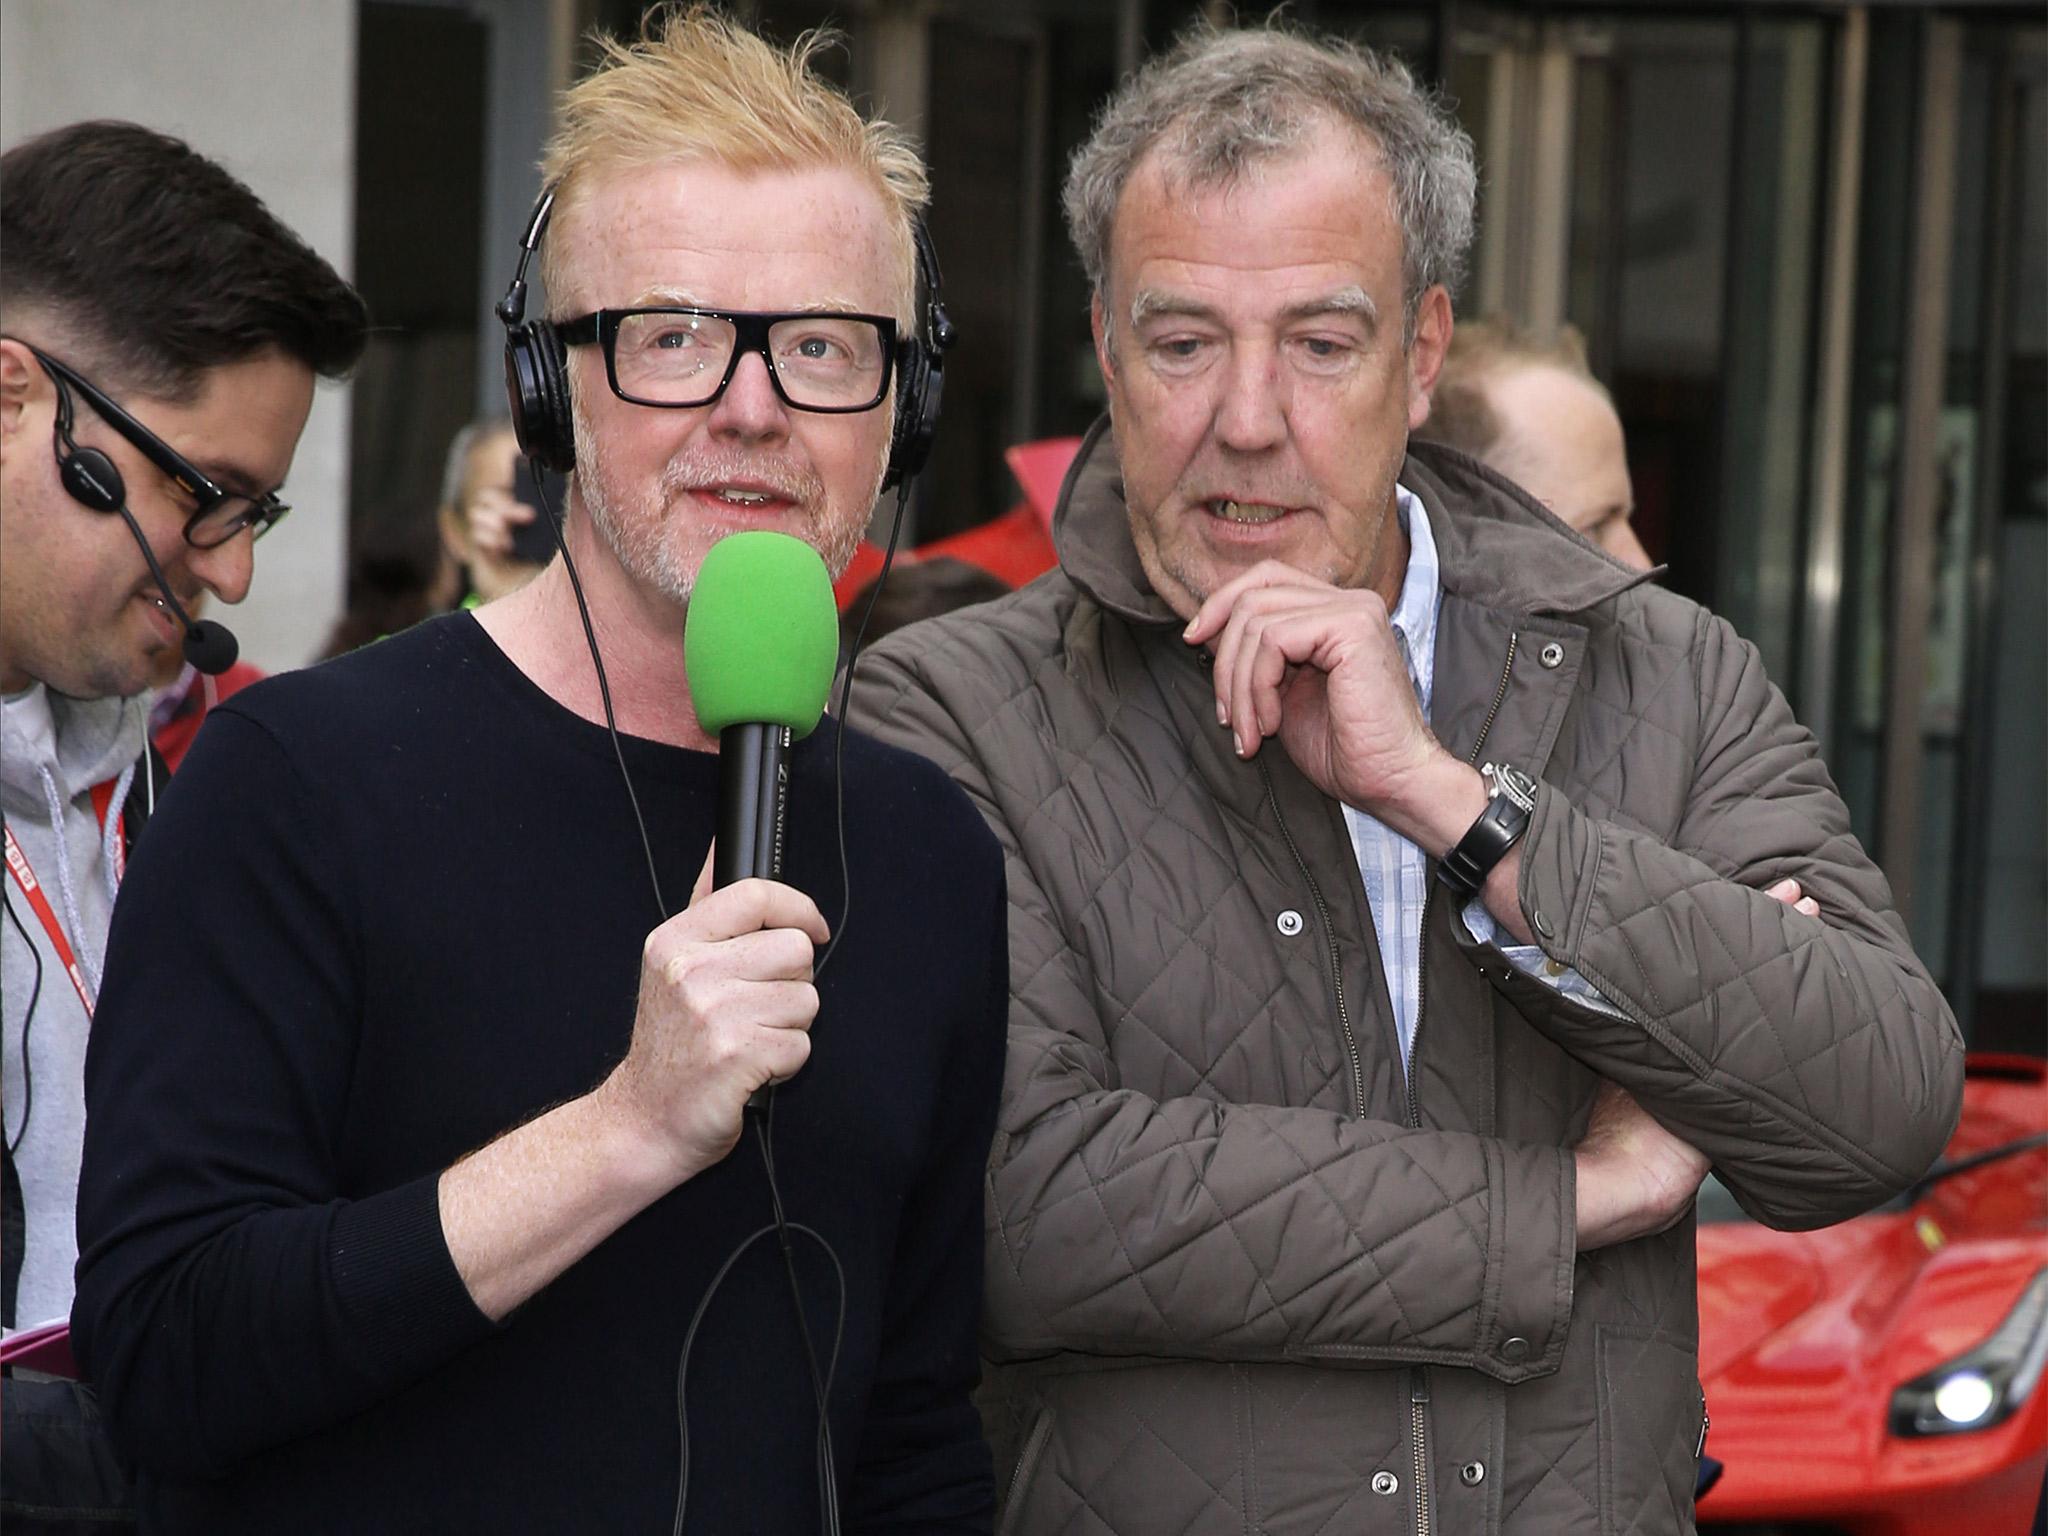 Jeremy Clarkson has wished new Top Gear host Chris Evans 'all the very best'